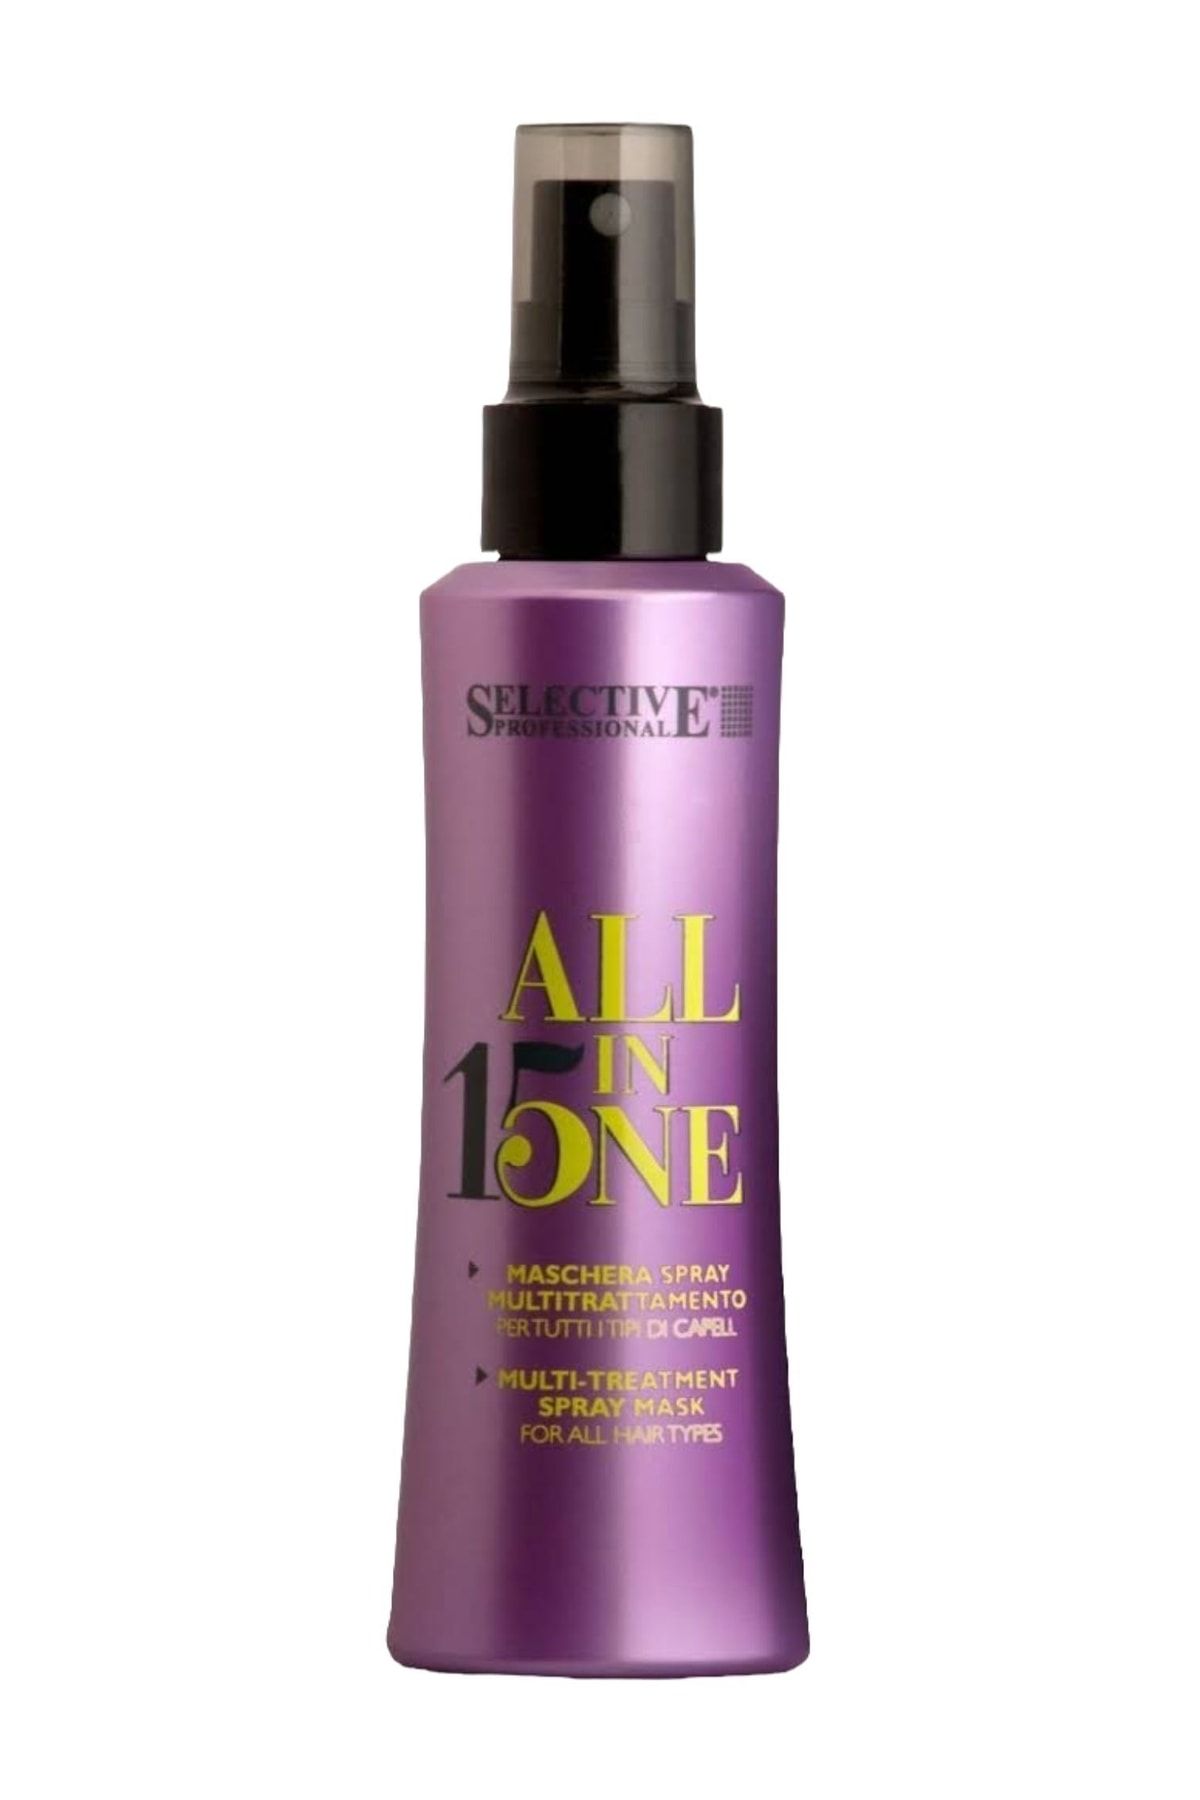 Selective Professional All In One Turco Flacone 150ml